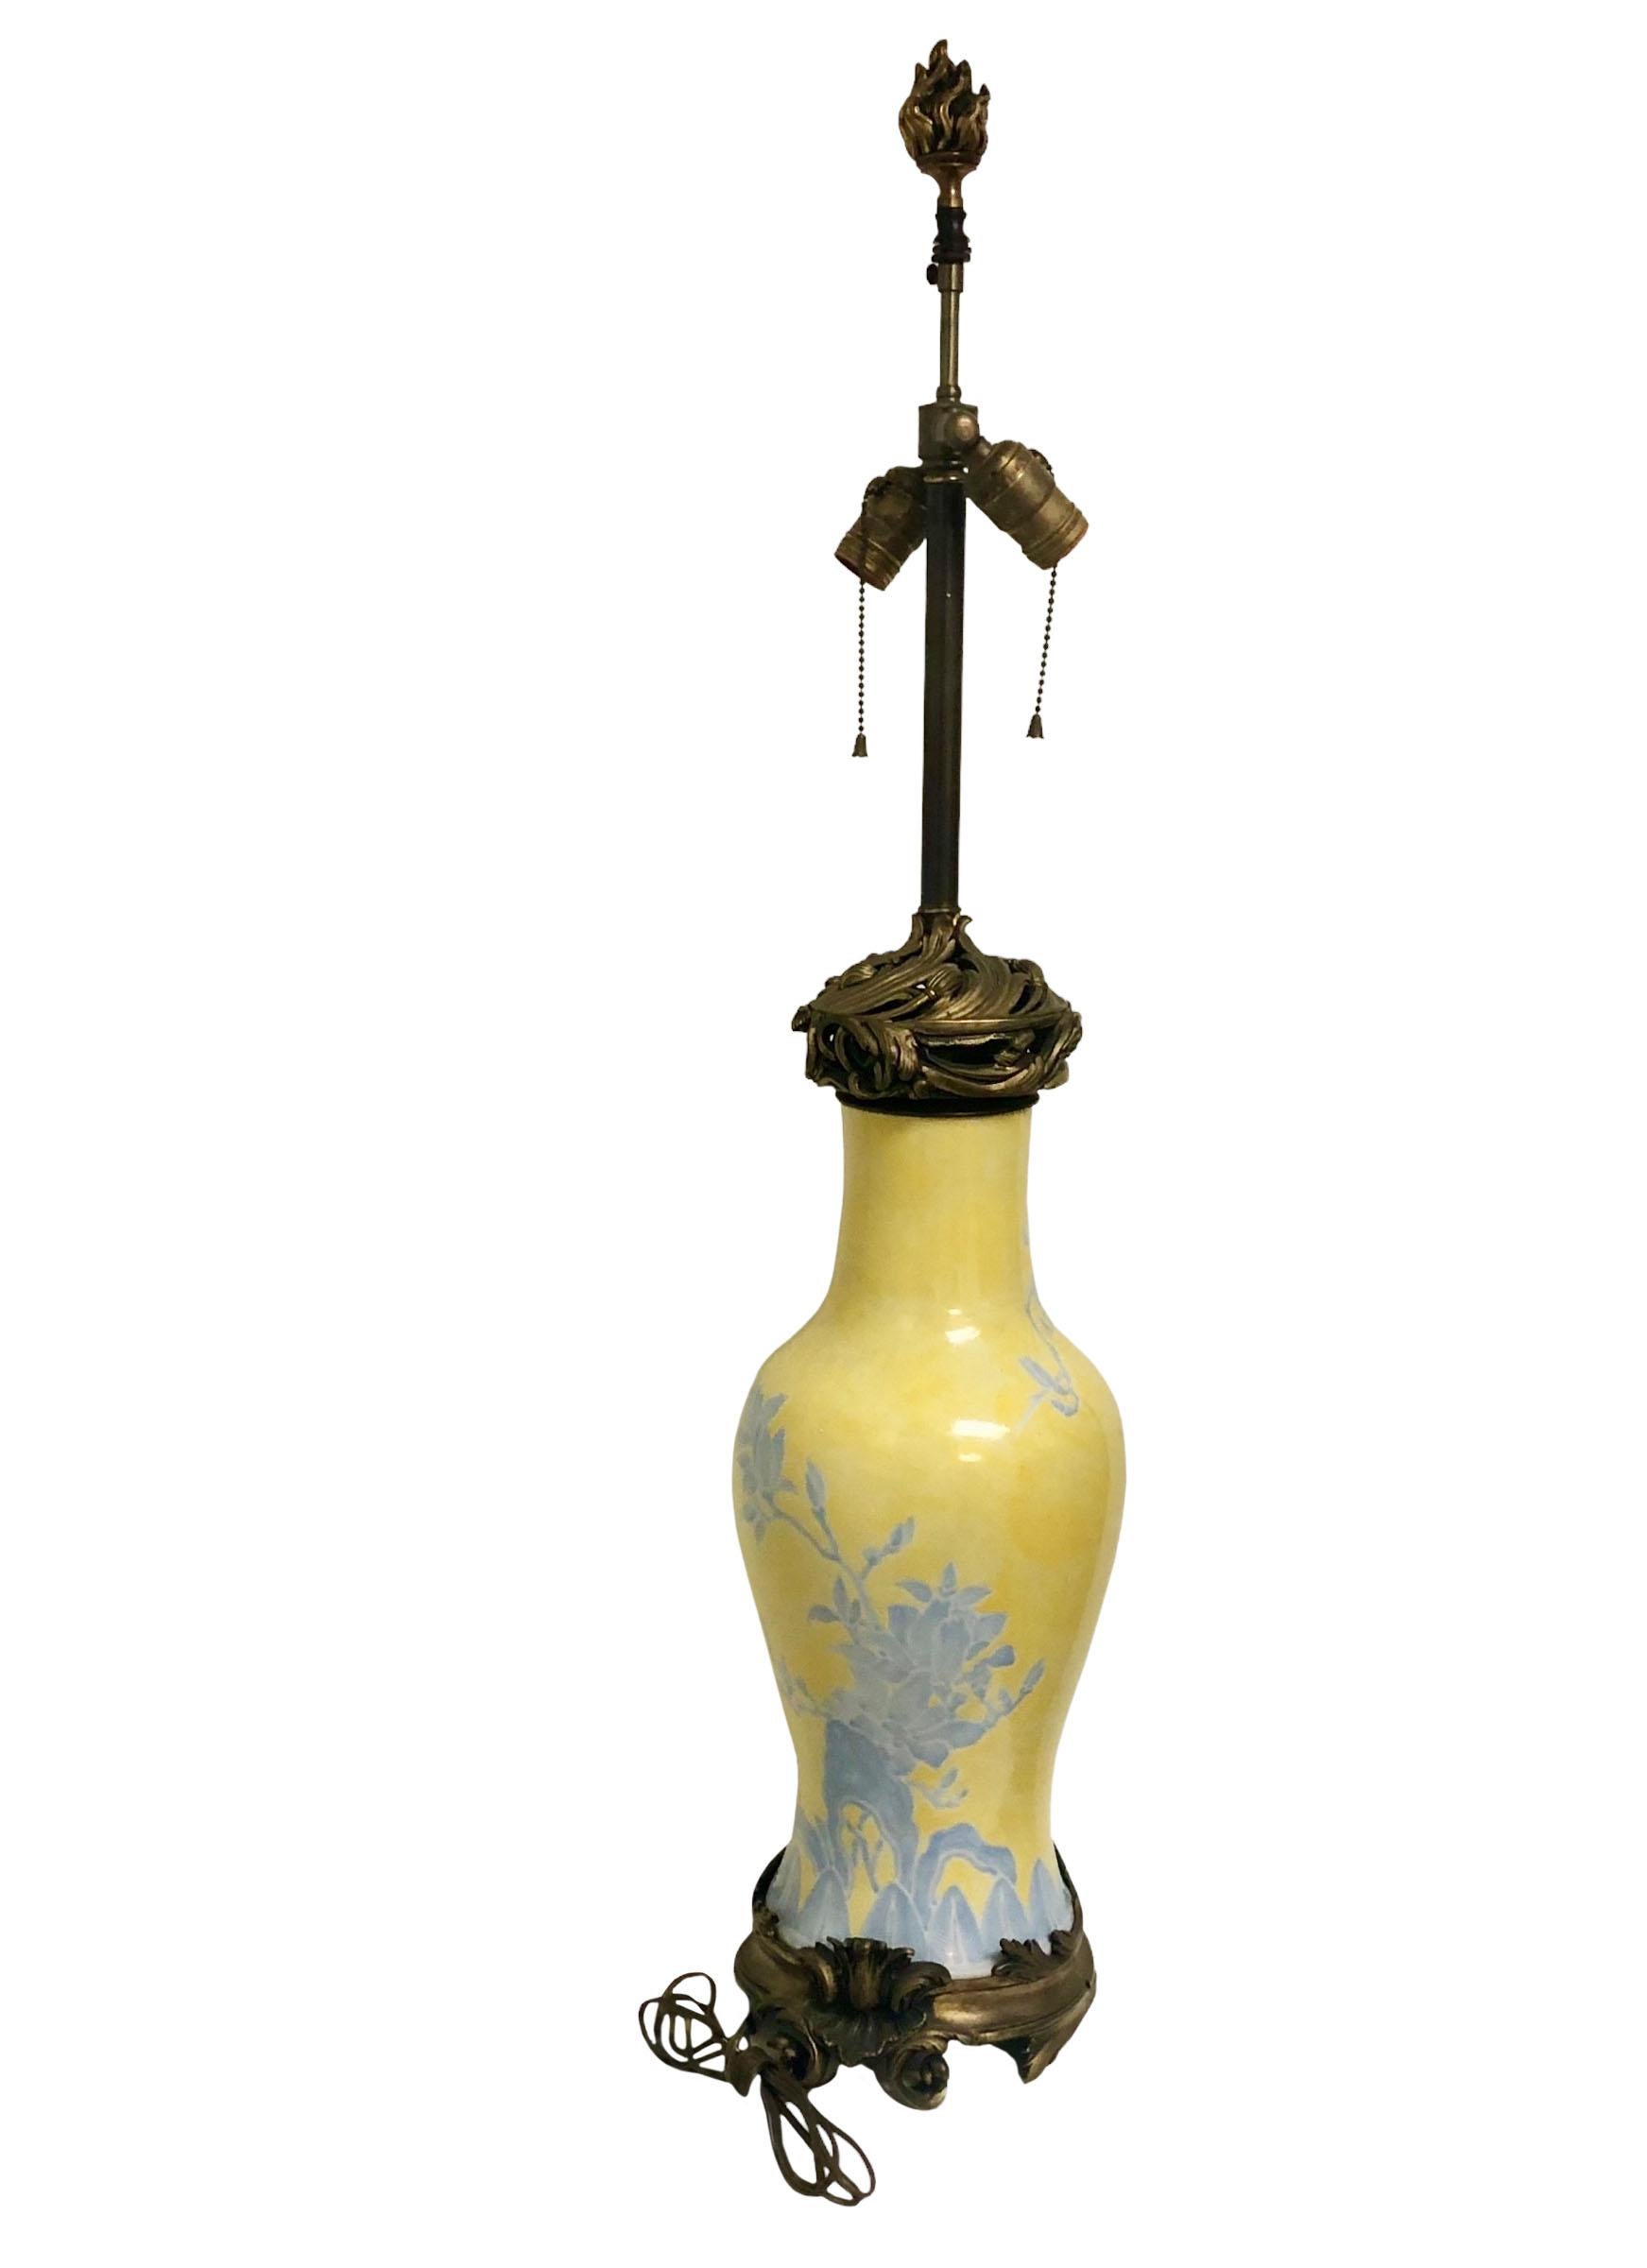 A beautiful single Rococo lamp. Yellow with blue flowers and vines. The base probably made in Thailand in the 1960s but the lamp its self is 19th century.